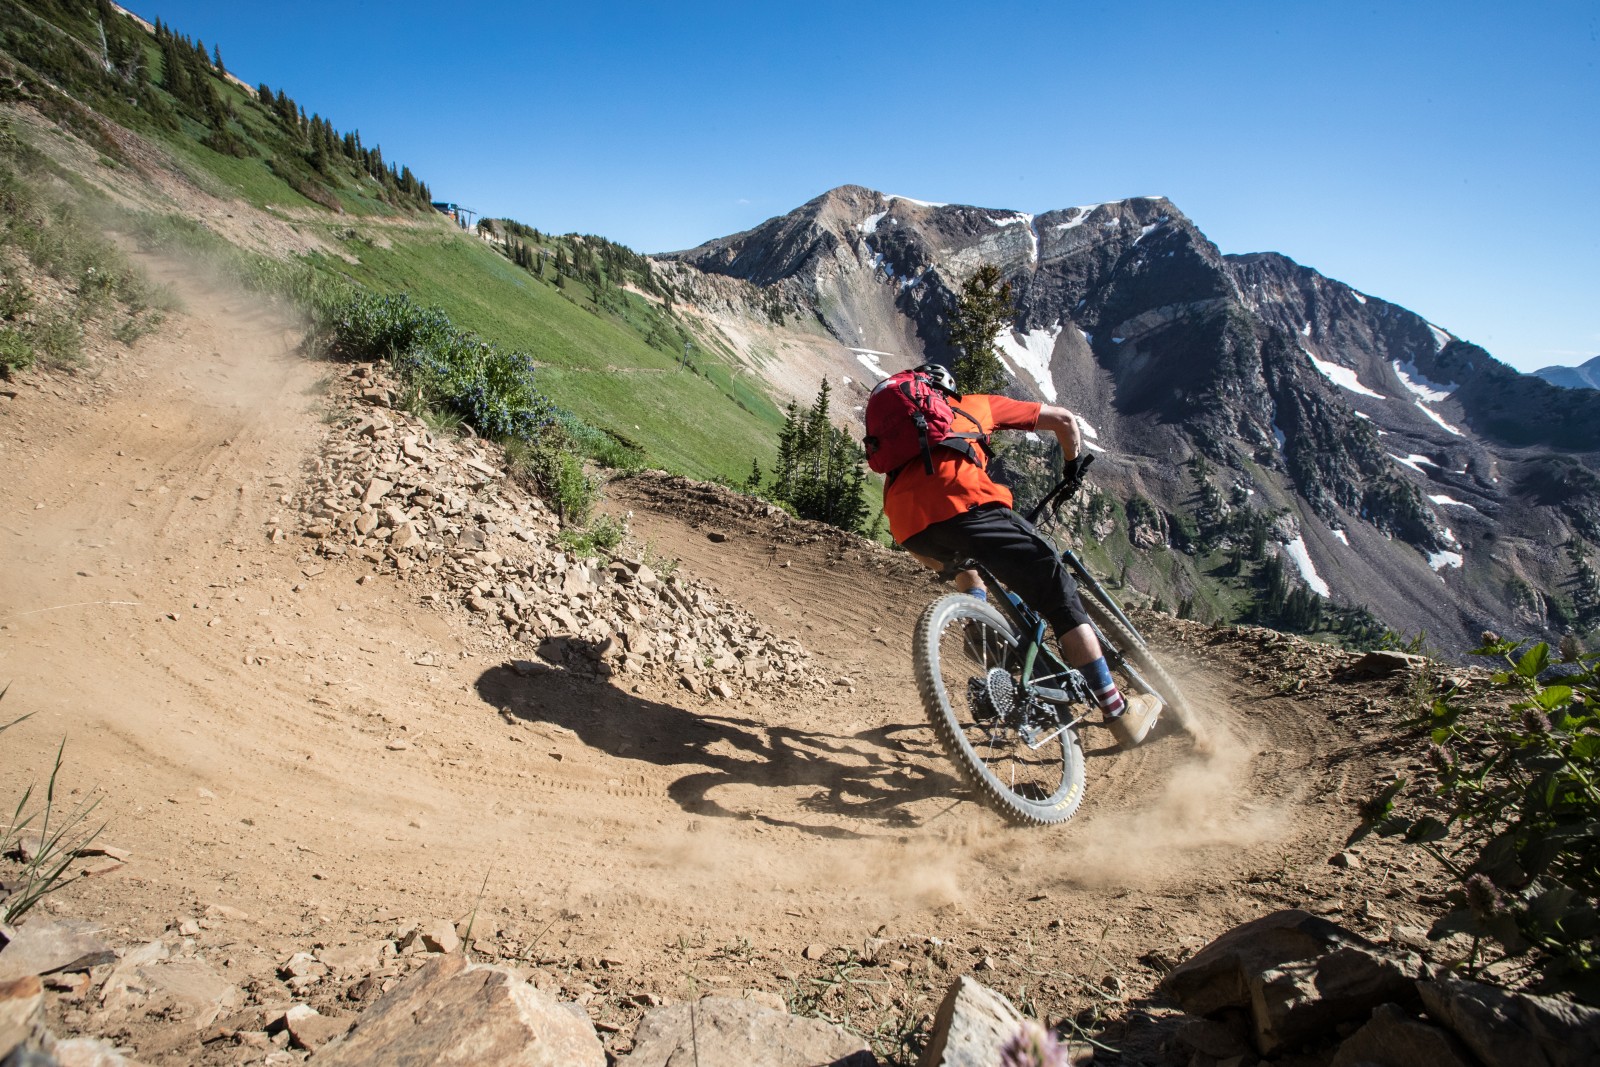 Hero Dirt - A Look into Some of Utah's Most Accessible Expert Mountain Biking Trails